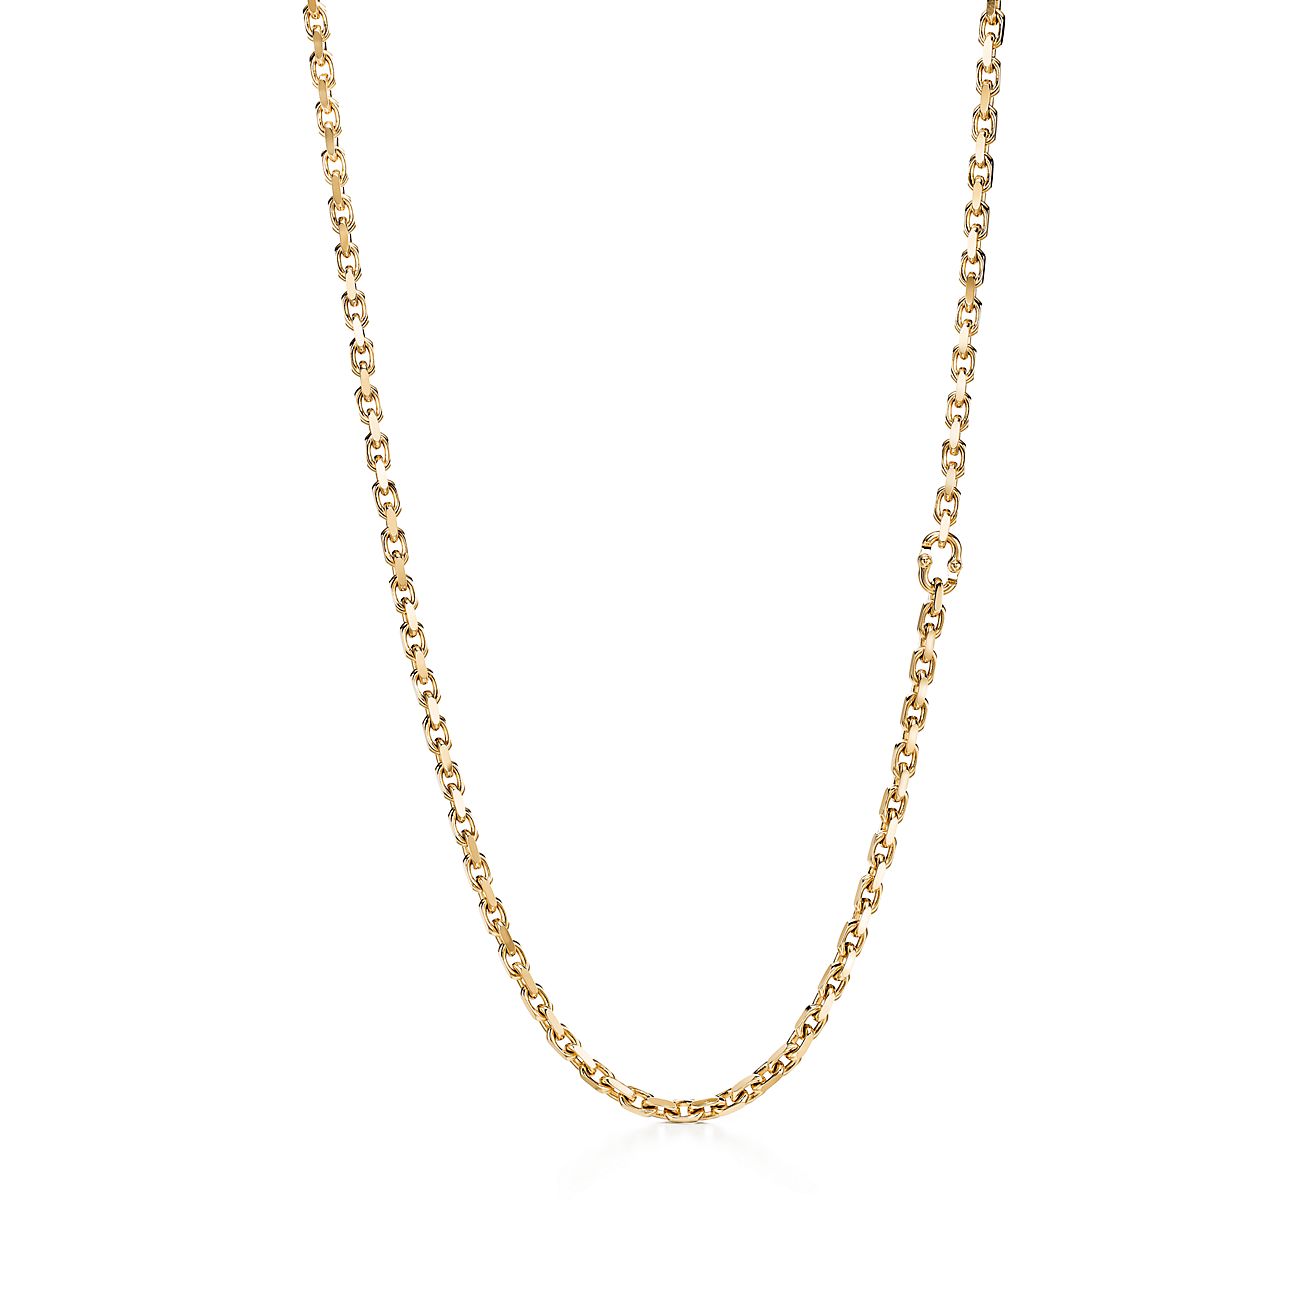 tiffany yellow gold necklace